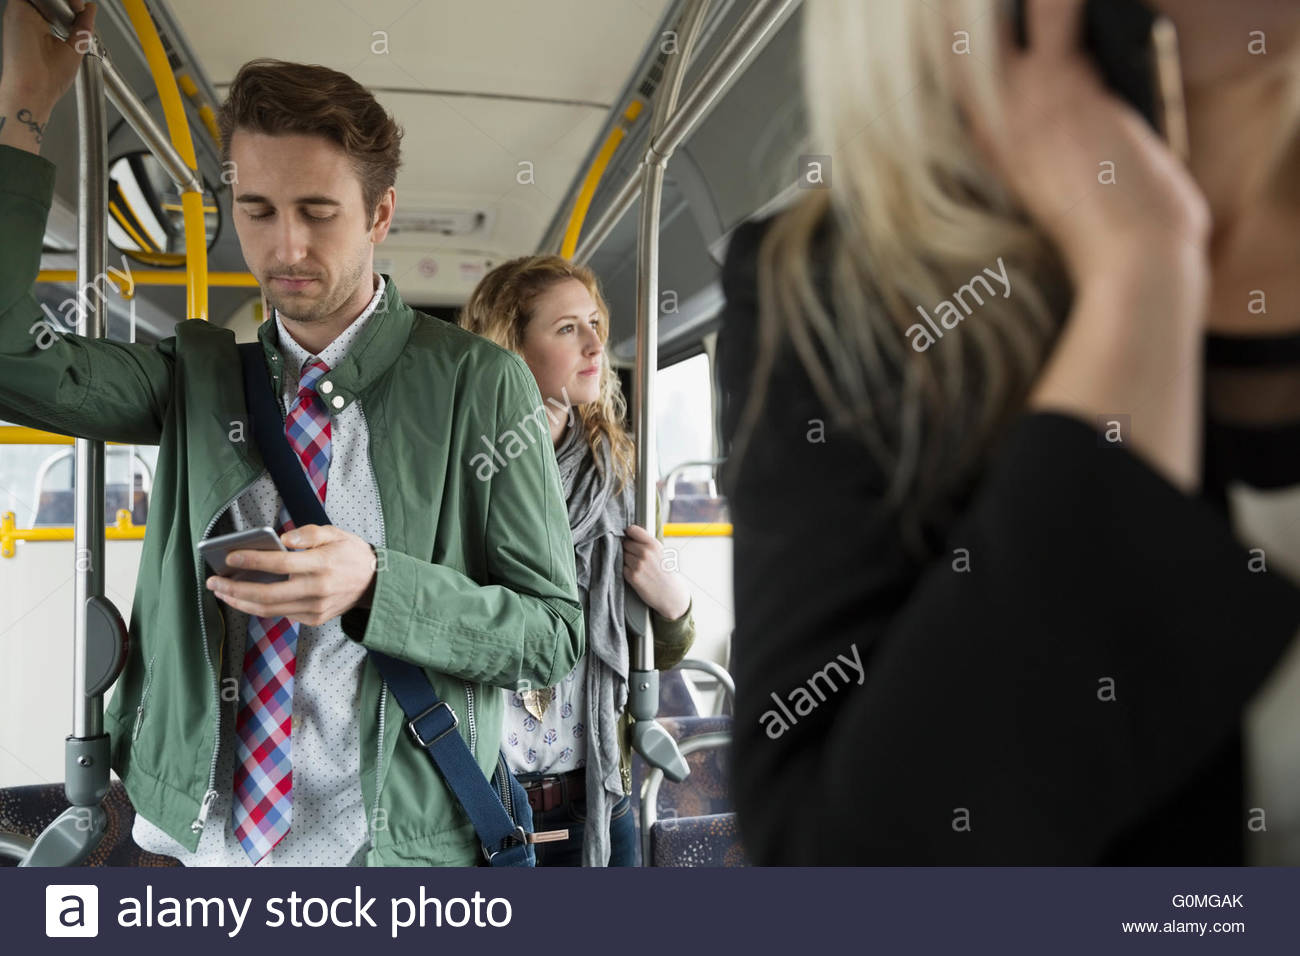 Businessman texting with cell phone standing on bus Stock Photo